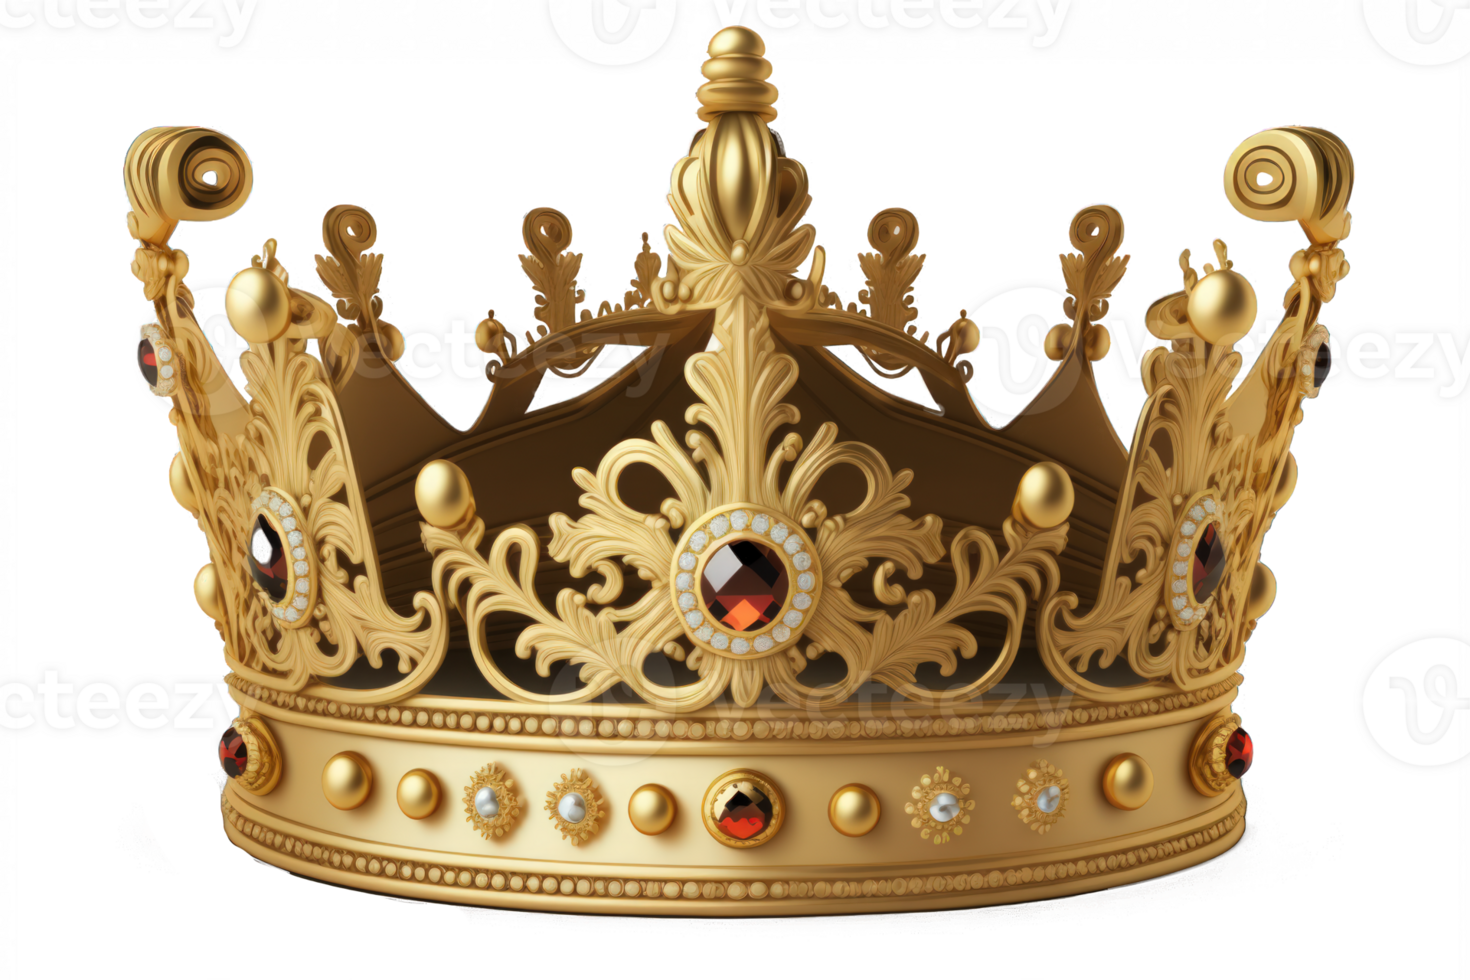 A striking golden crown sits majestically on a transparent background, with intricate details that make it appear almost lifelike. png